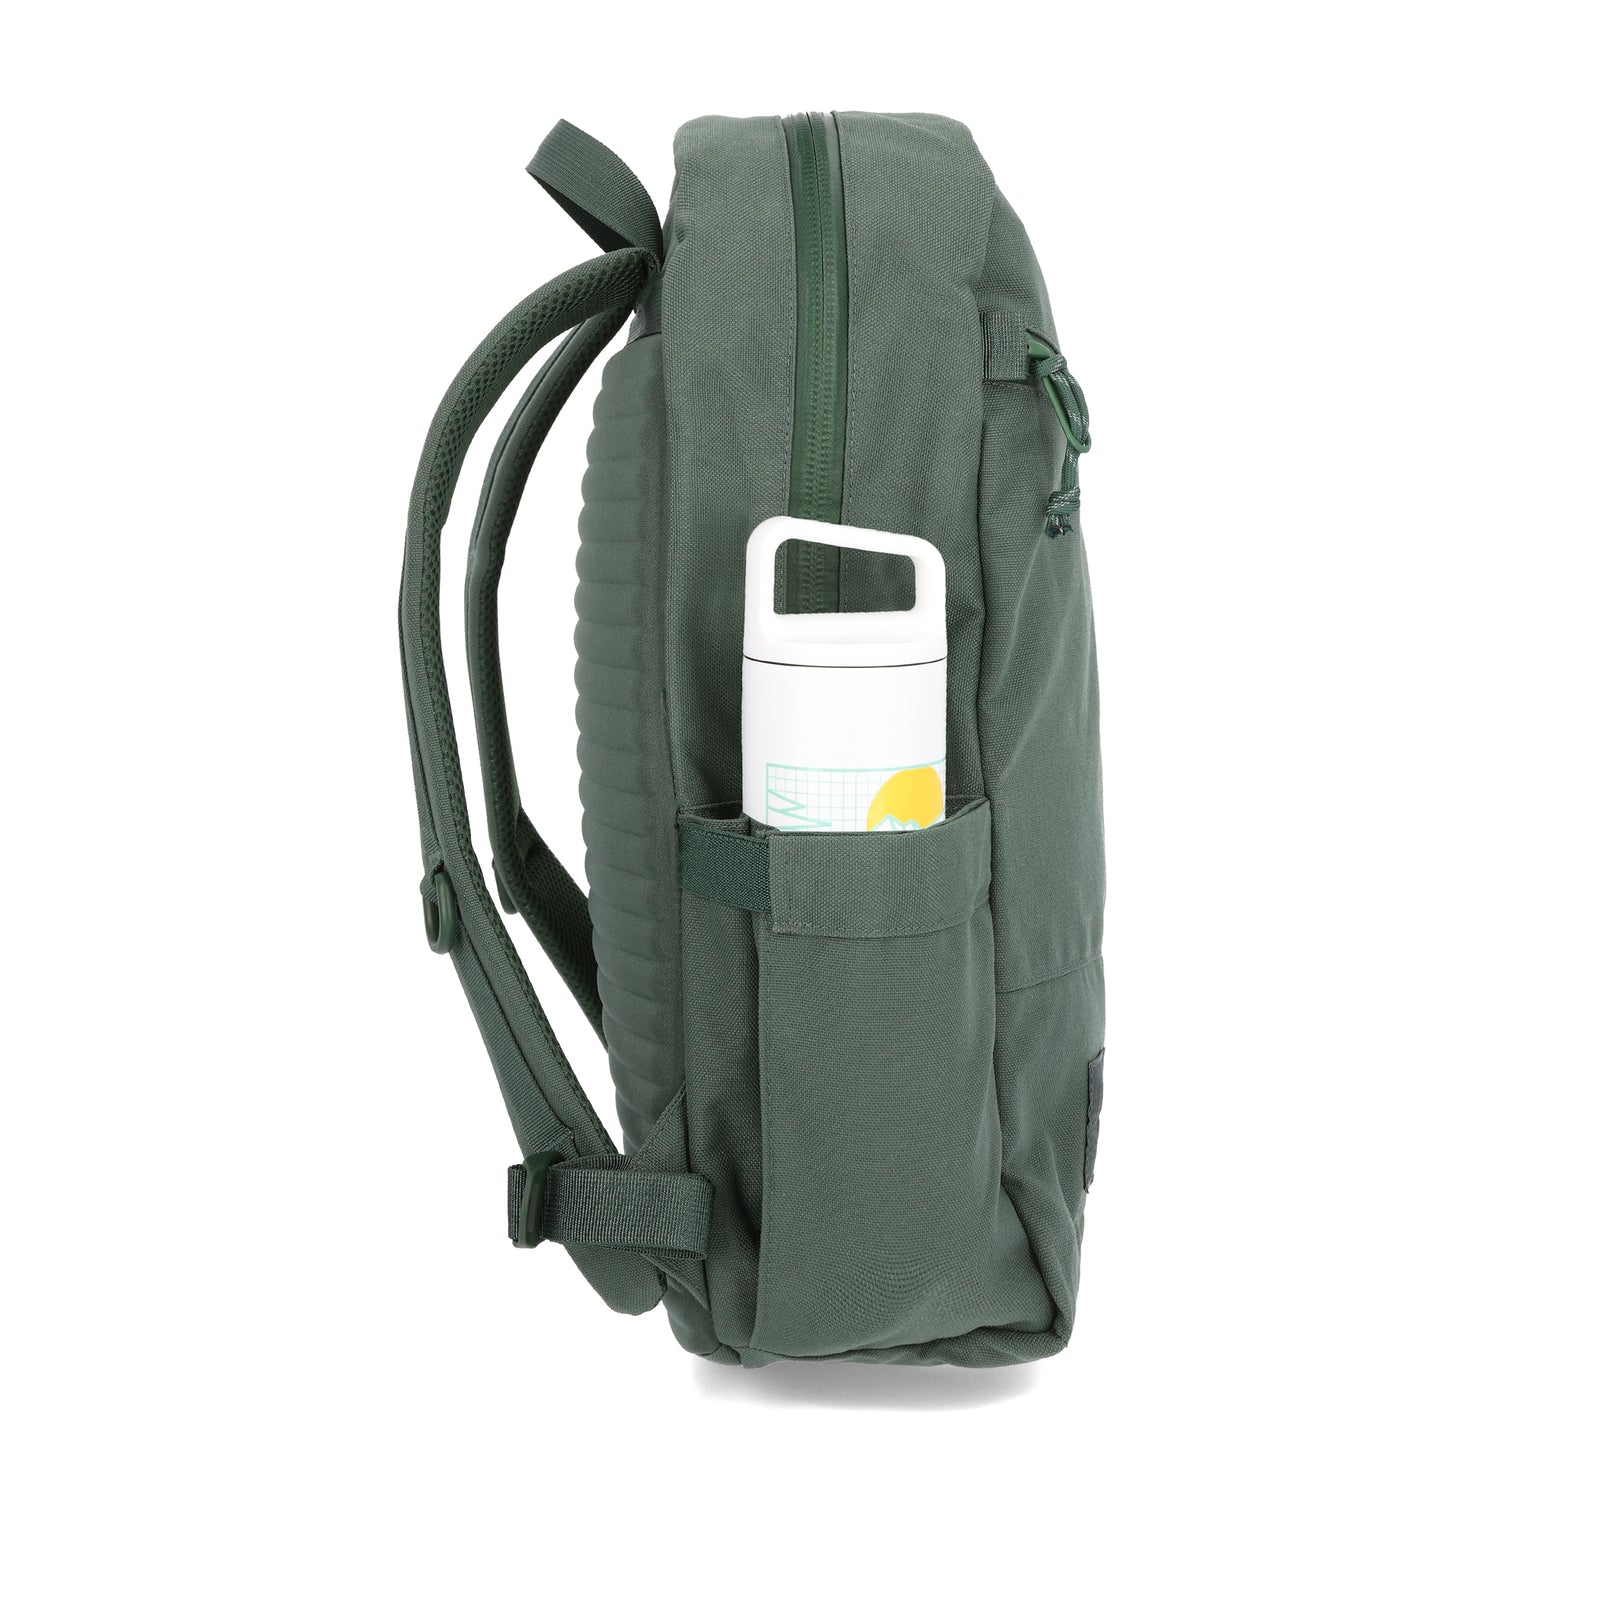 General shot Topo Designs Daypack Tech 100% recycled nylon backpack with external laptop access in "Forest" green.